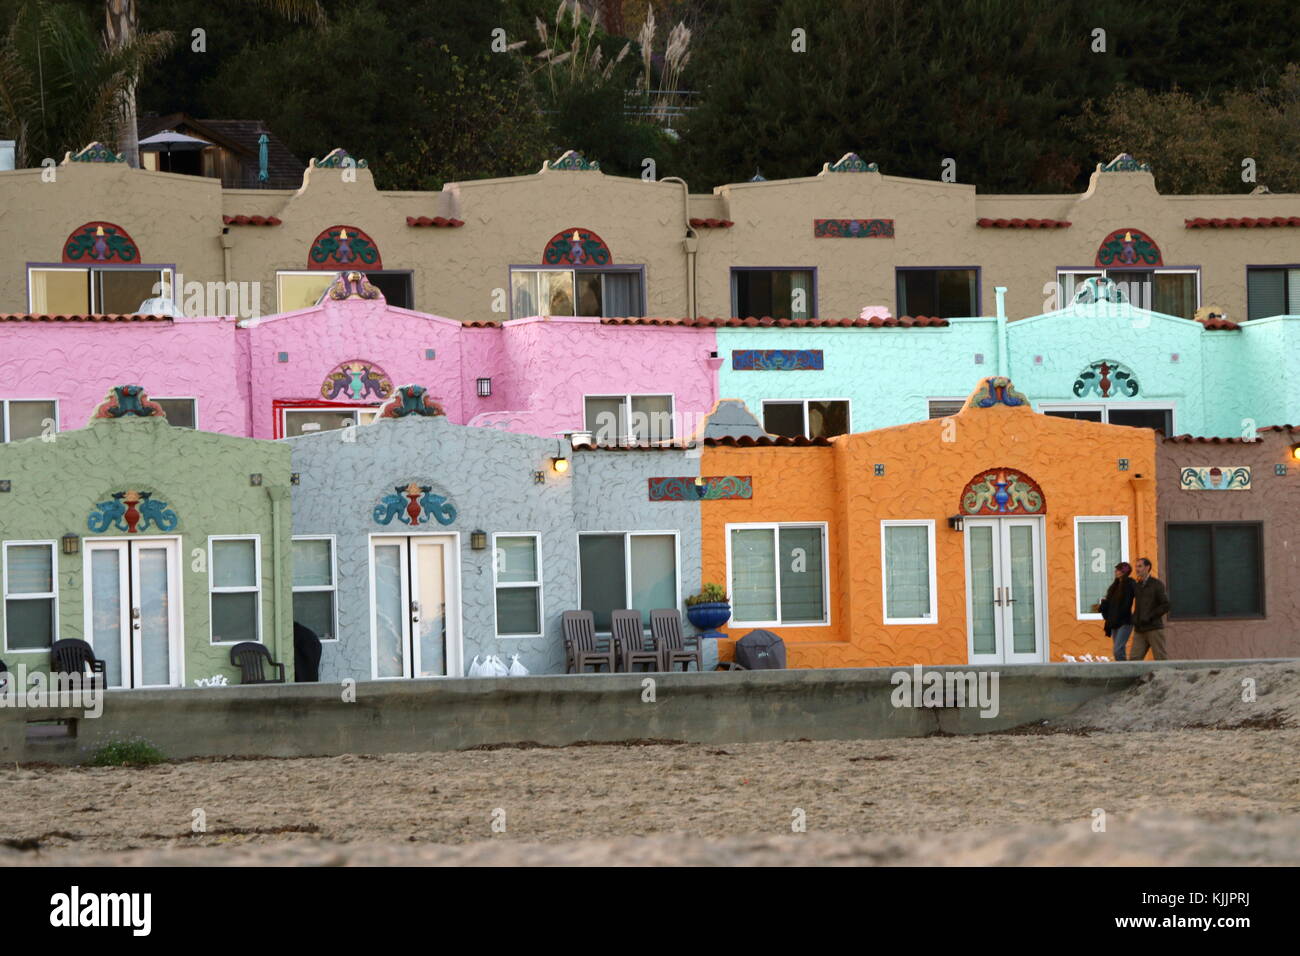 Colorful beach bungalows, Capitola by the Sea, California. Stock Photo